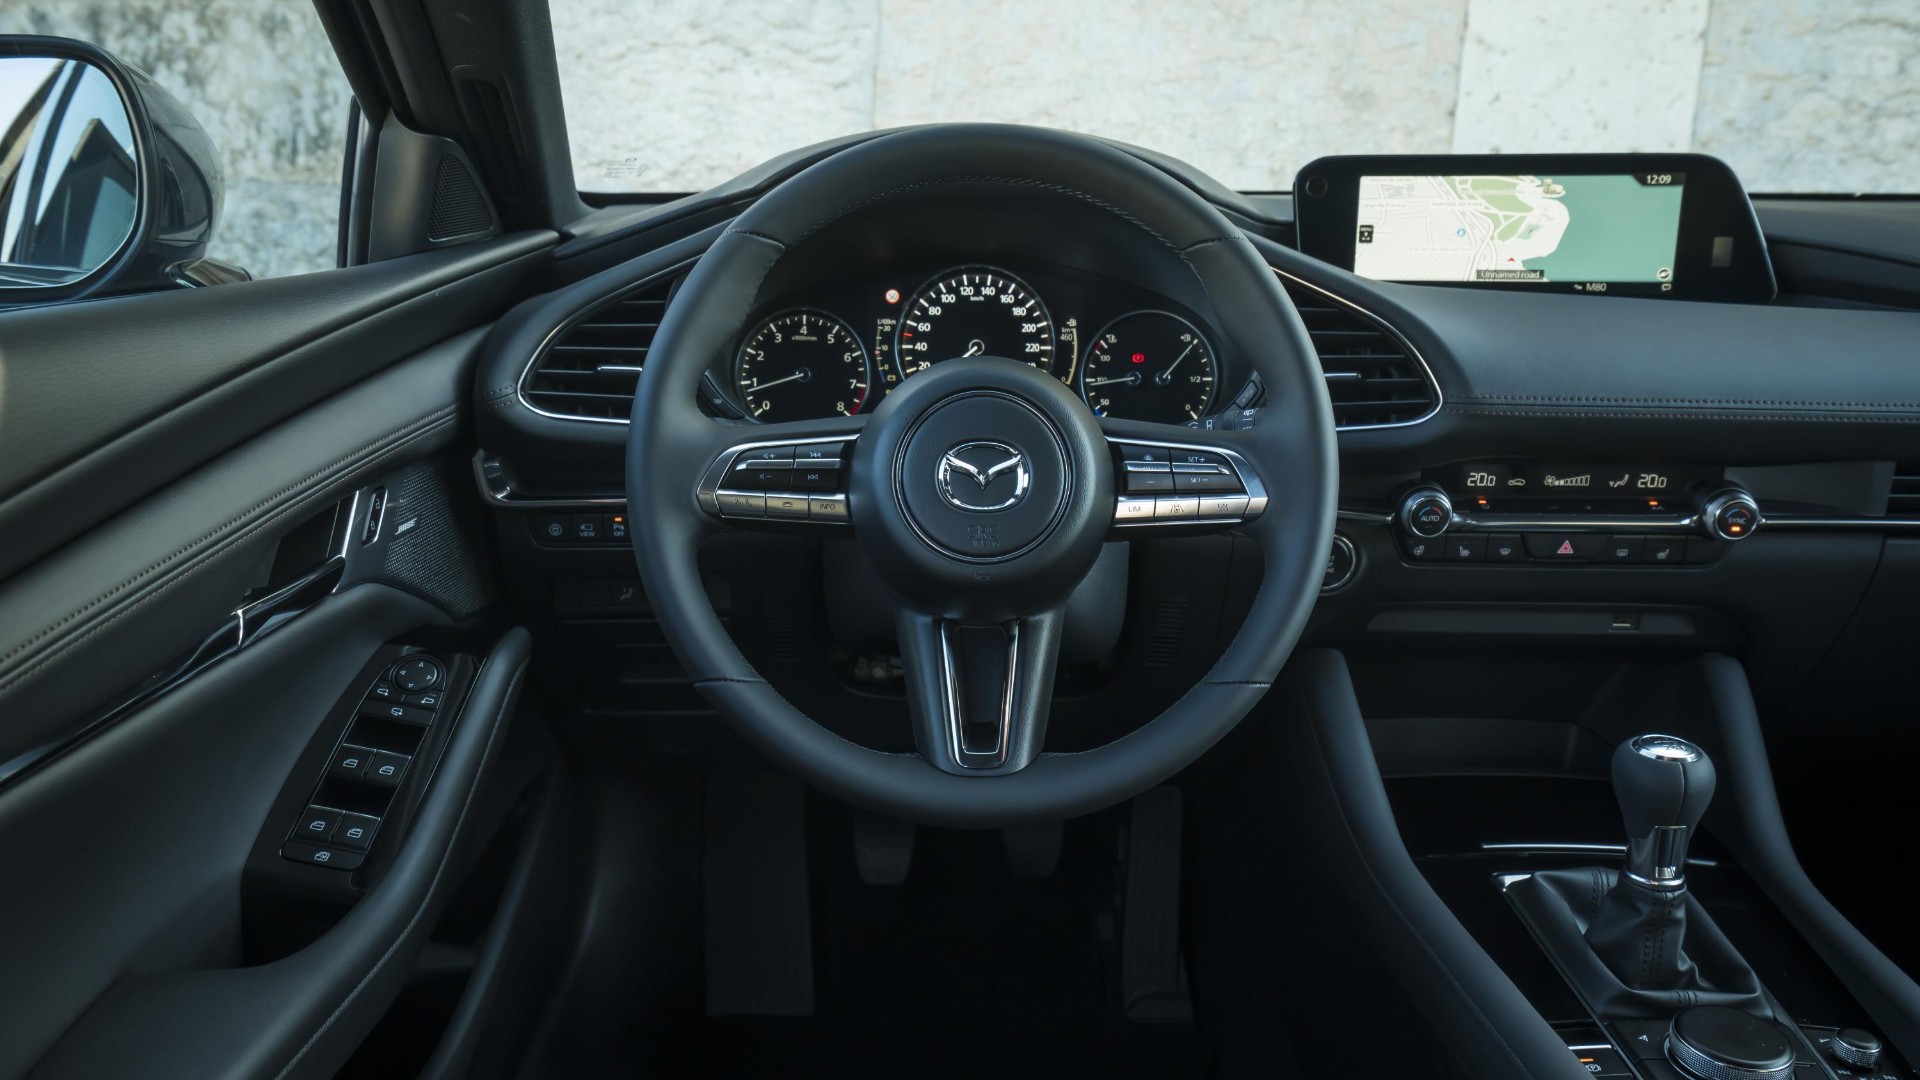 Mazda is getting rid of touch screens